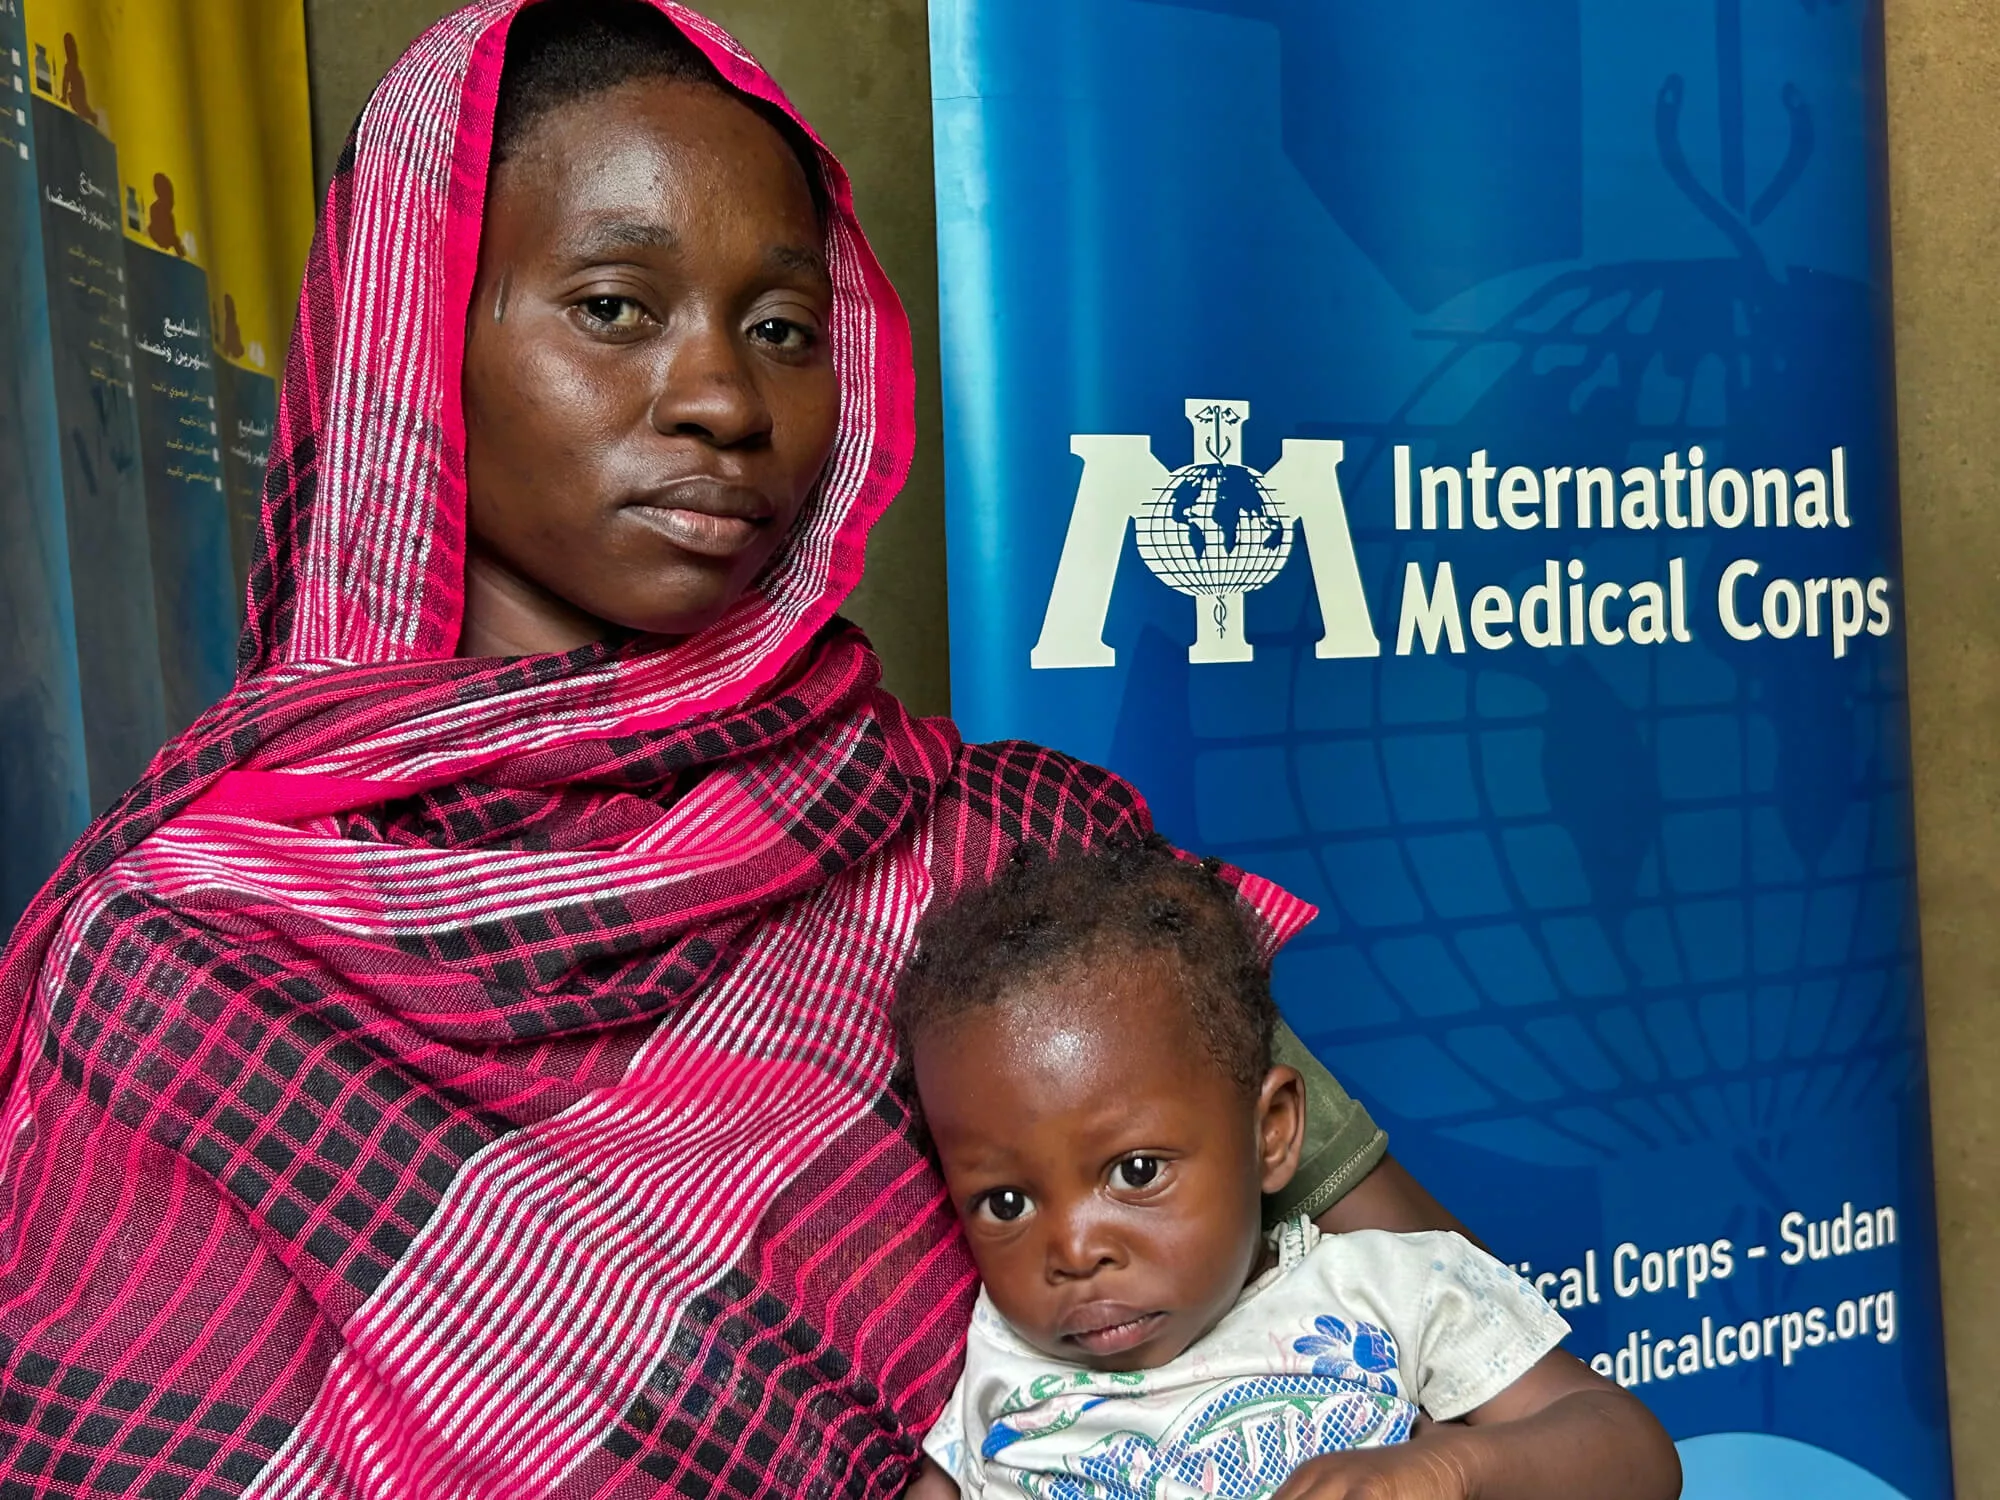 Nafeesa Mustafa sits with her son, Ahmed, in her lap at the Murafaa Althany Clinic in Sudan.